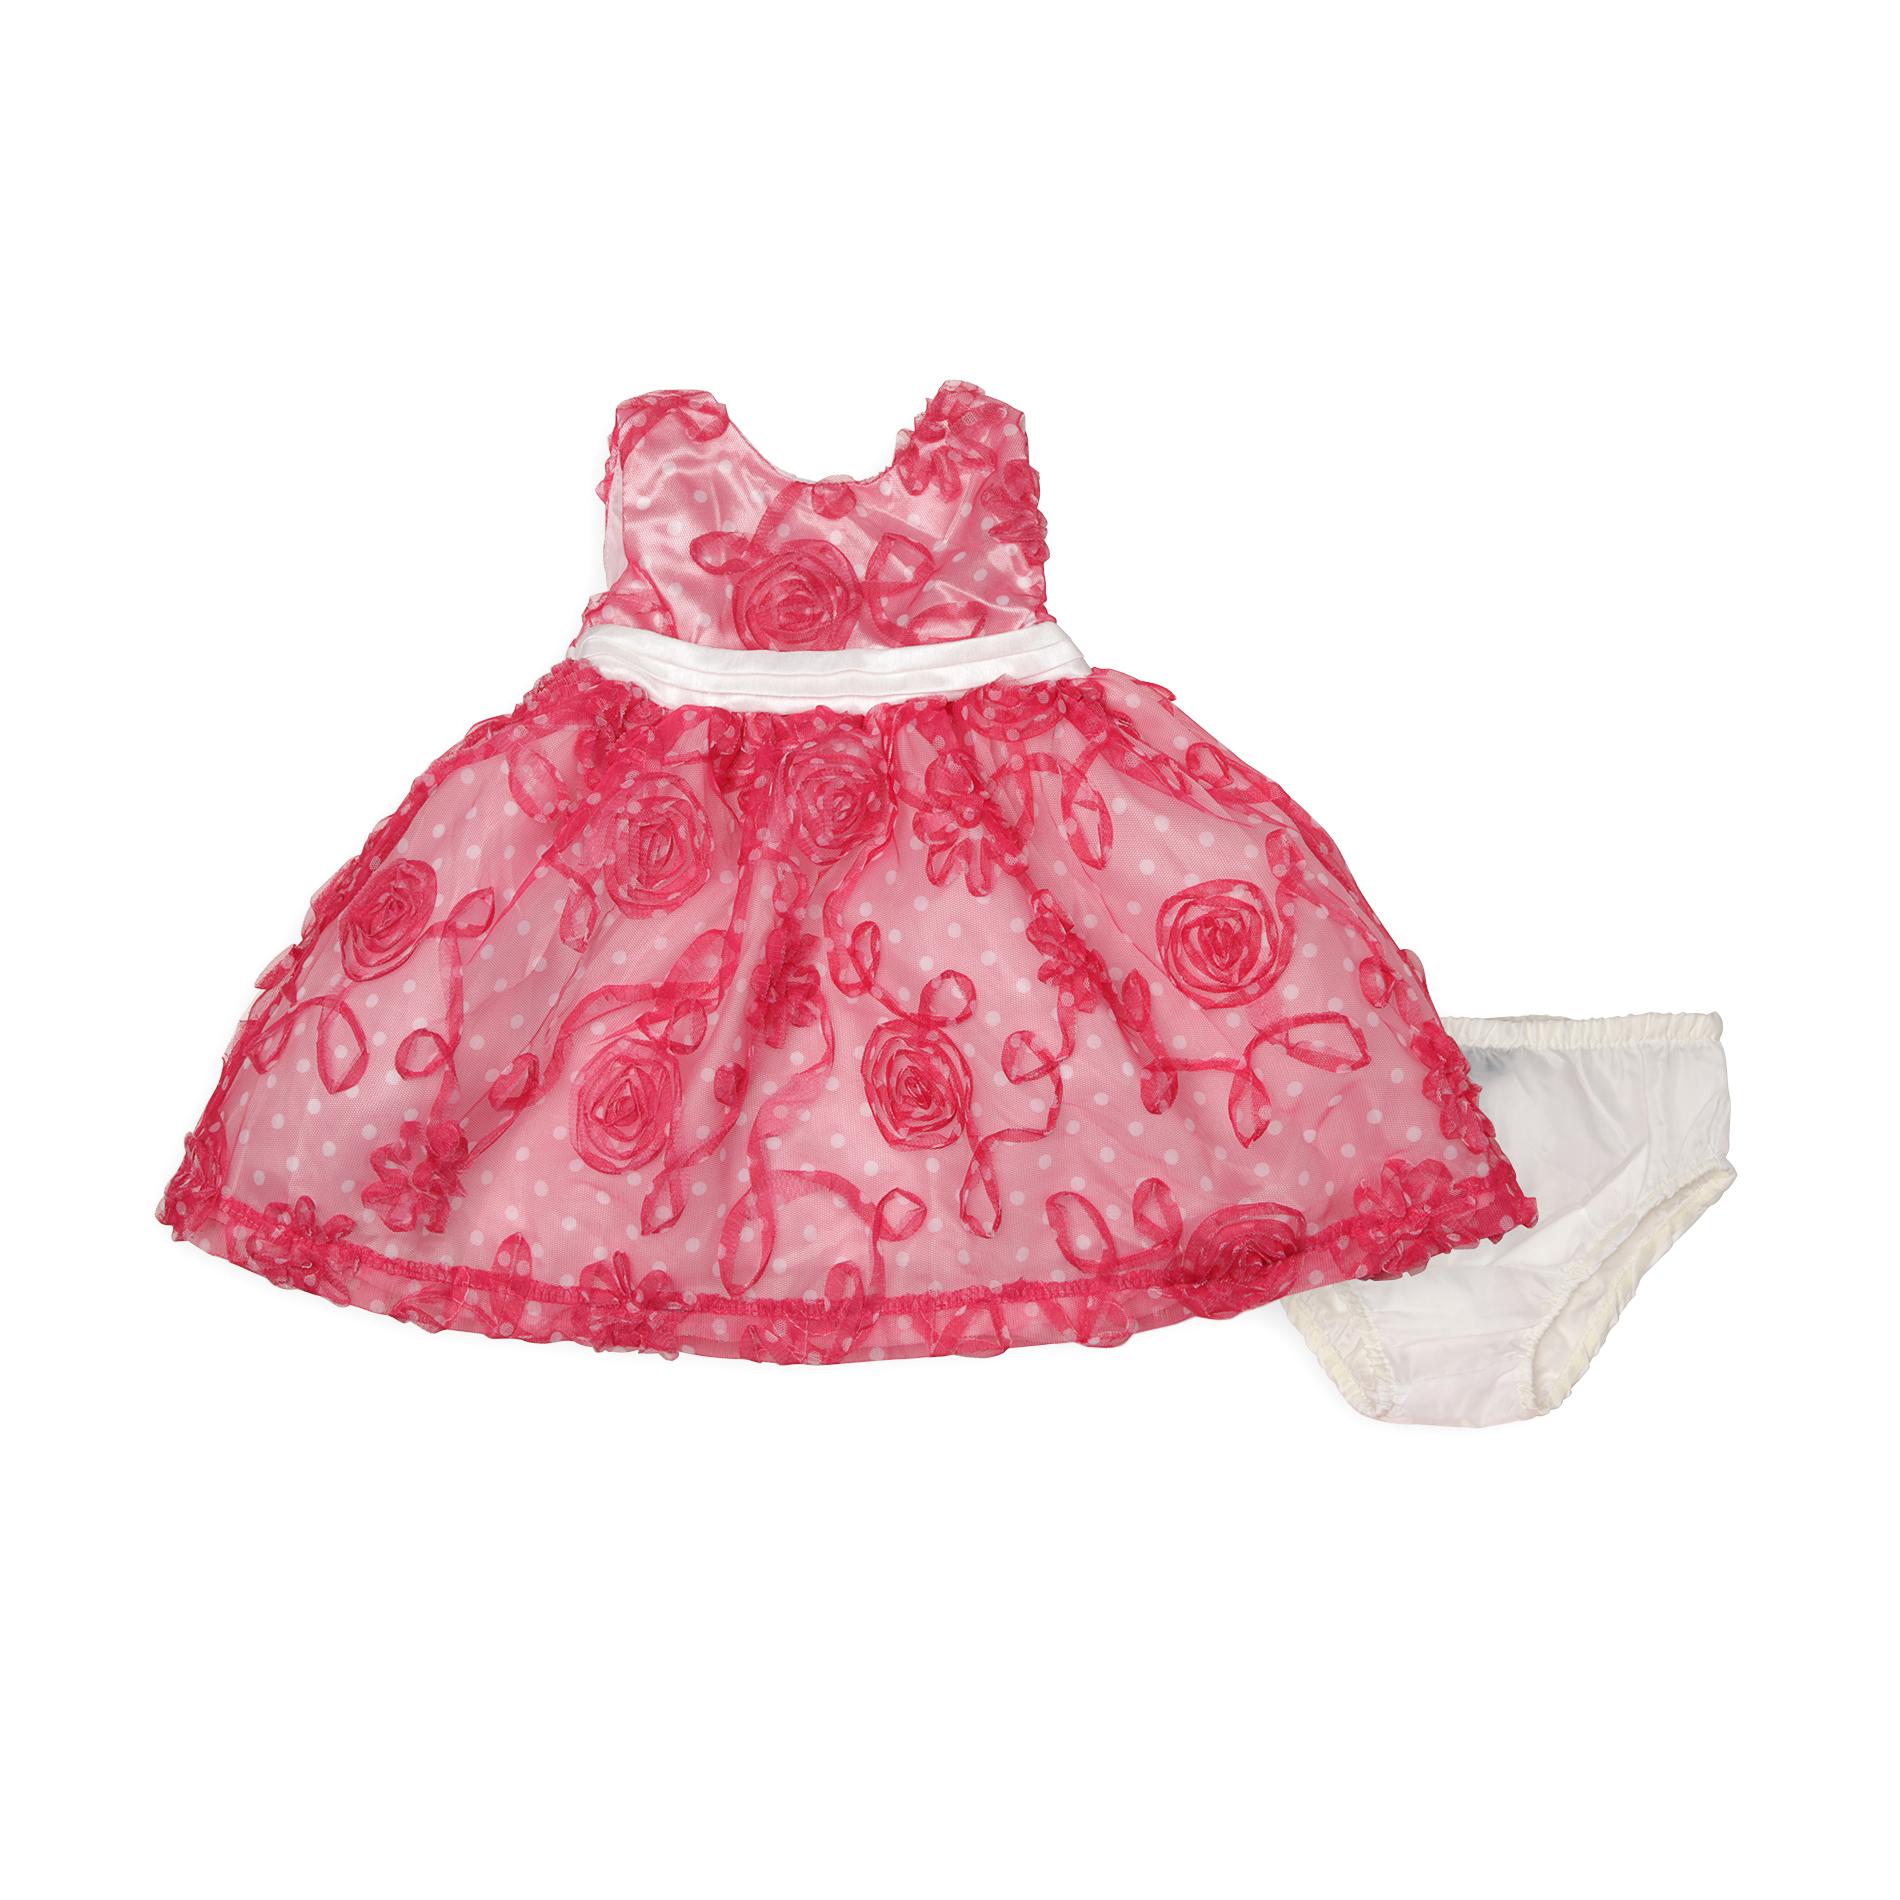 Holiday Editions Newborn Girl's Soutache Party Dress & Diaper Cover